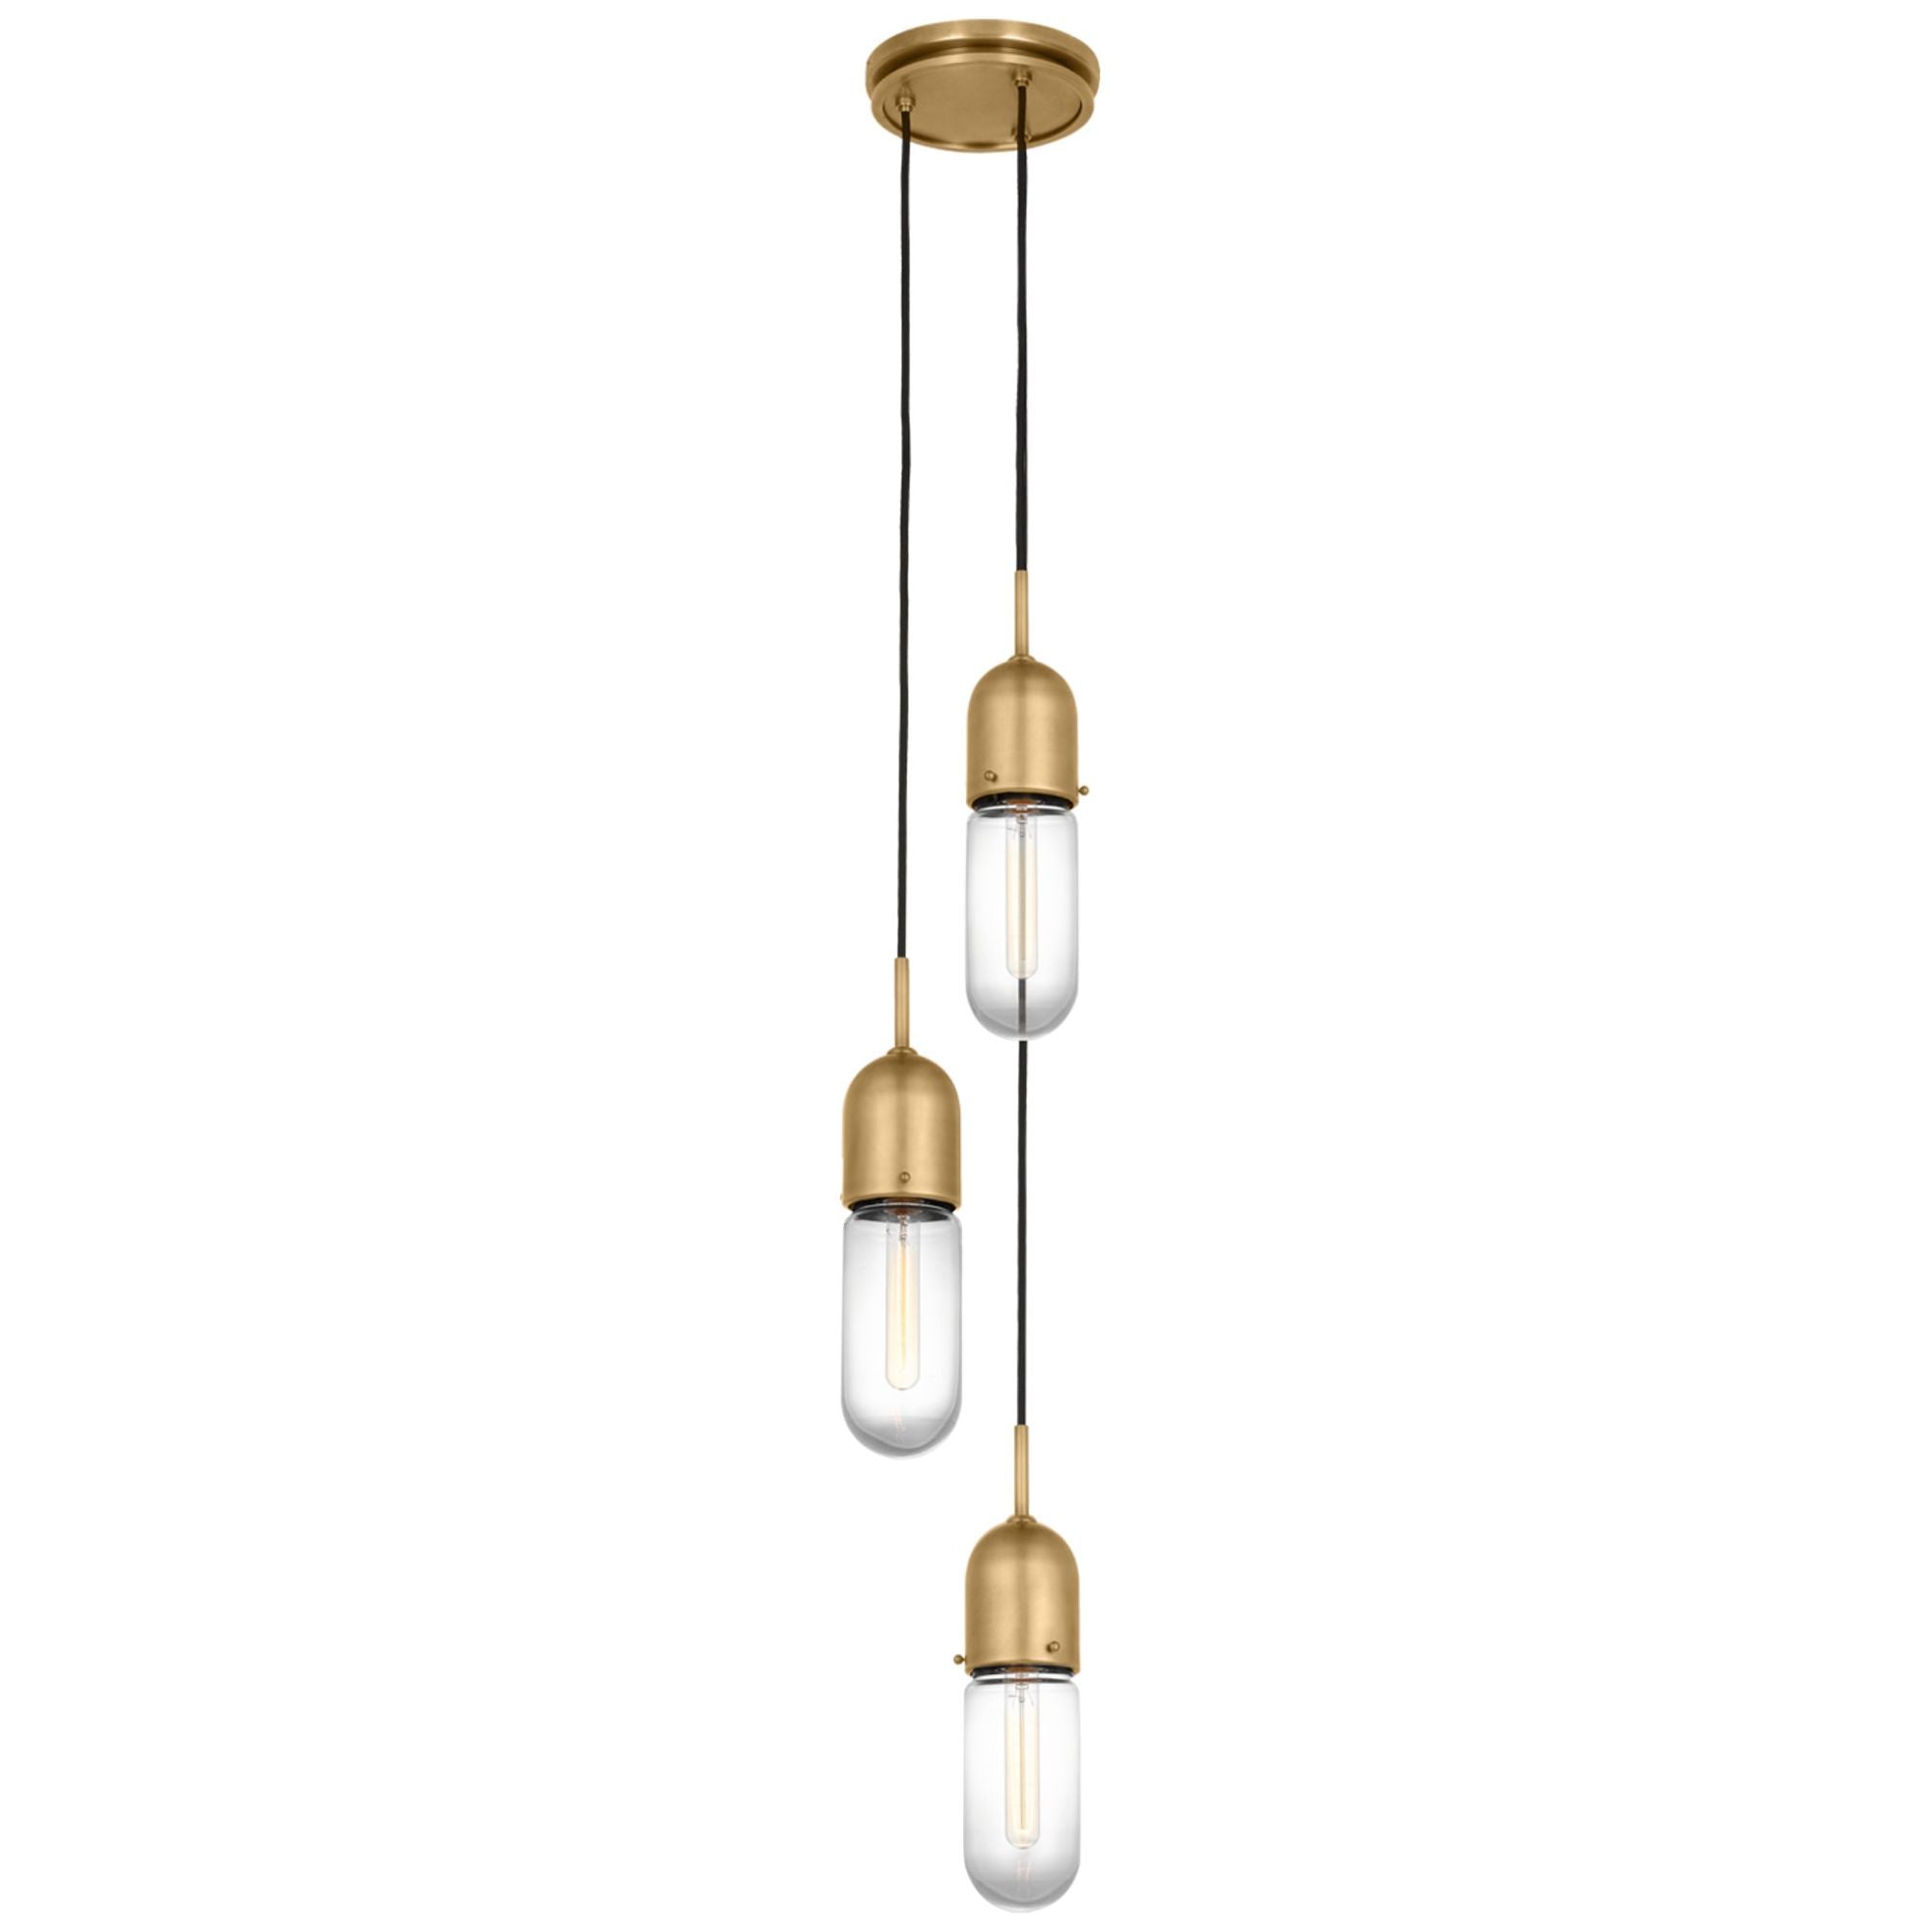 Thomas O'Brien Junio 3-Light Pendant in Hand-Rubbed Antique Brass with Clear Glass